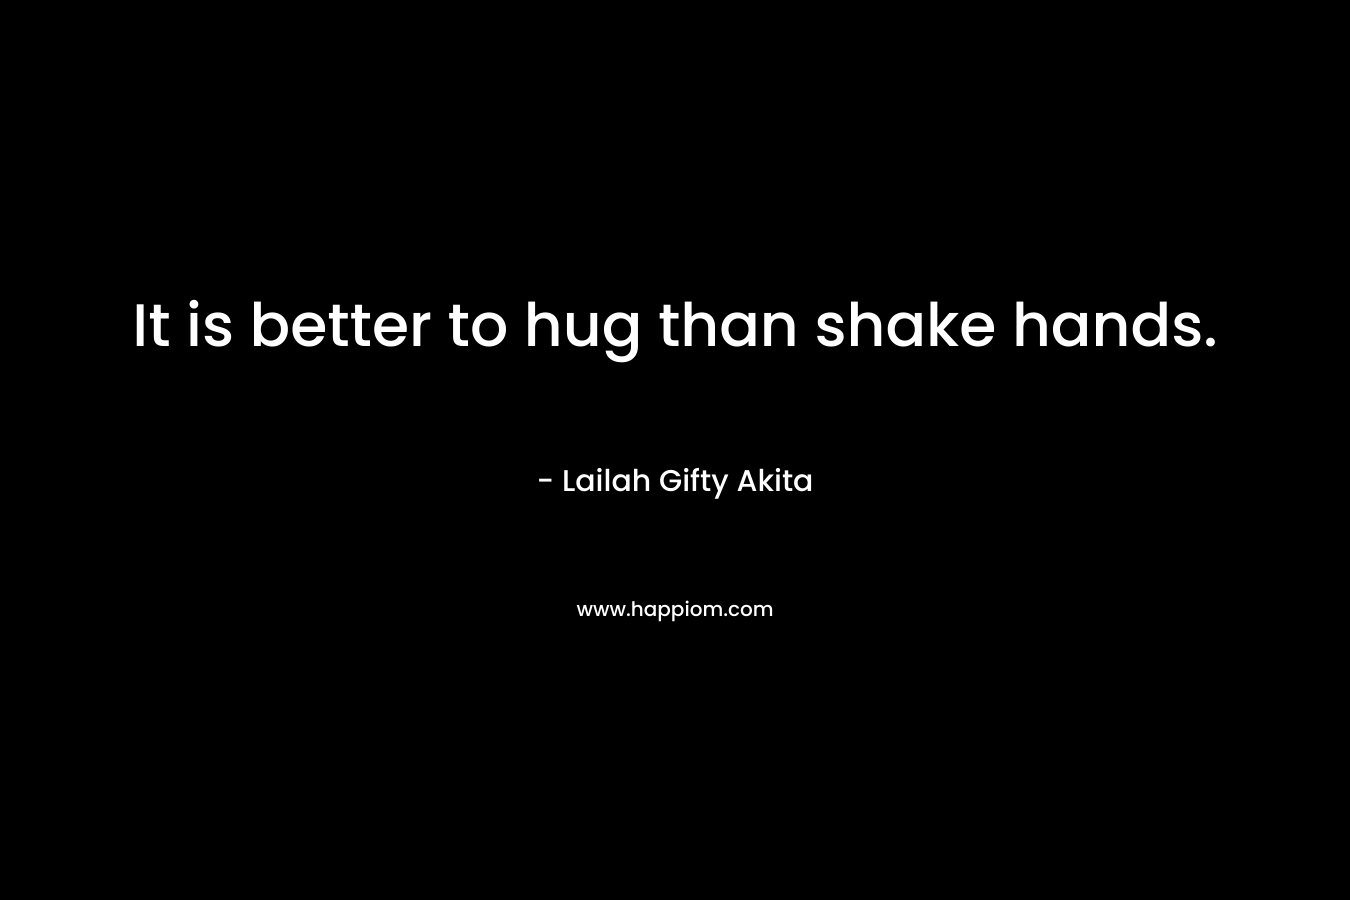 It is better to hug than shake hands.